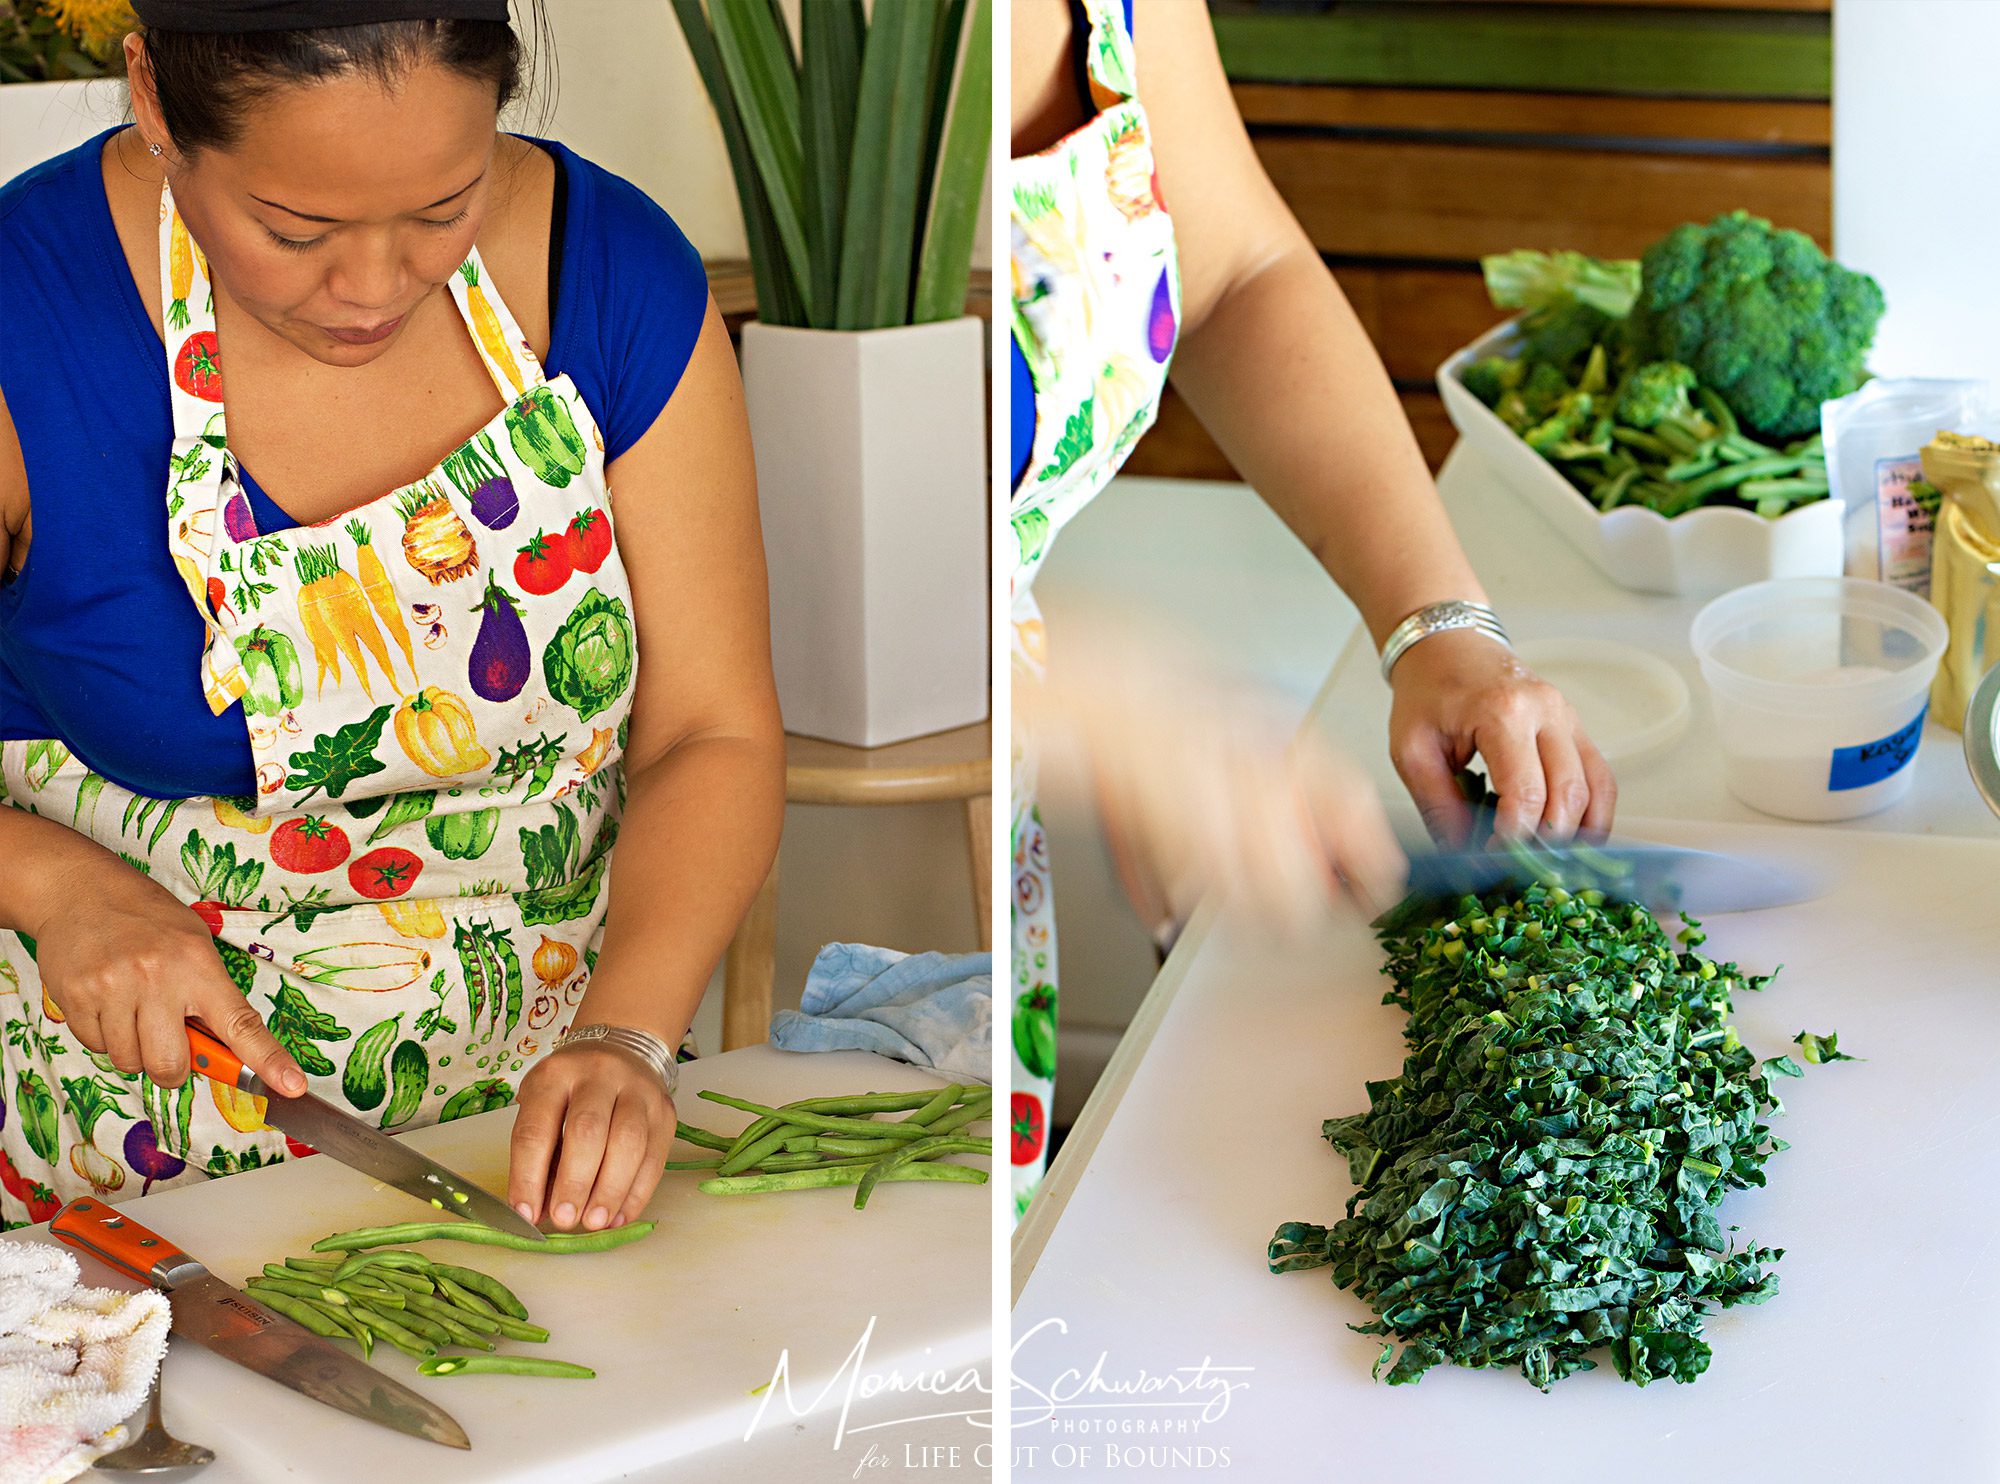 Chef-Lee-Anne-Wong-prepping-in-the-kitchen-Honolulu-Hawaii